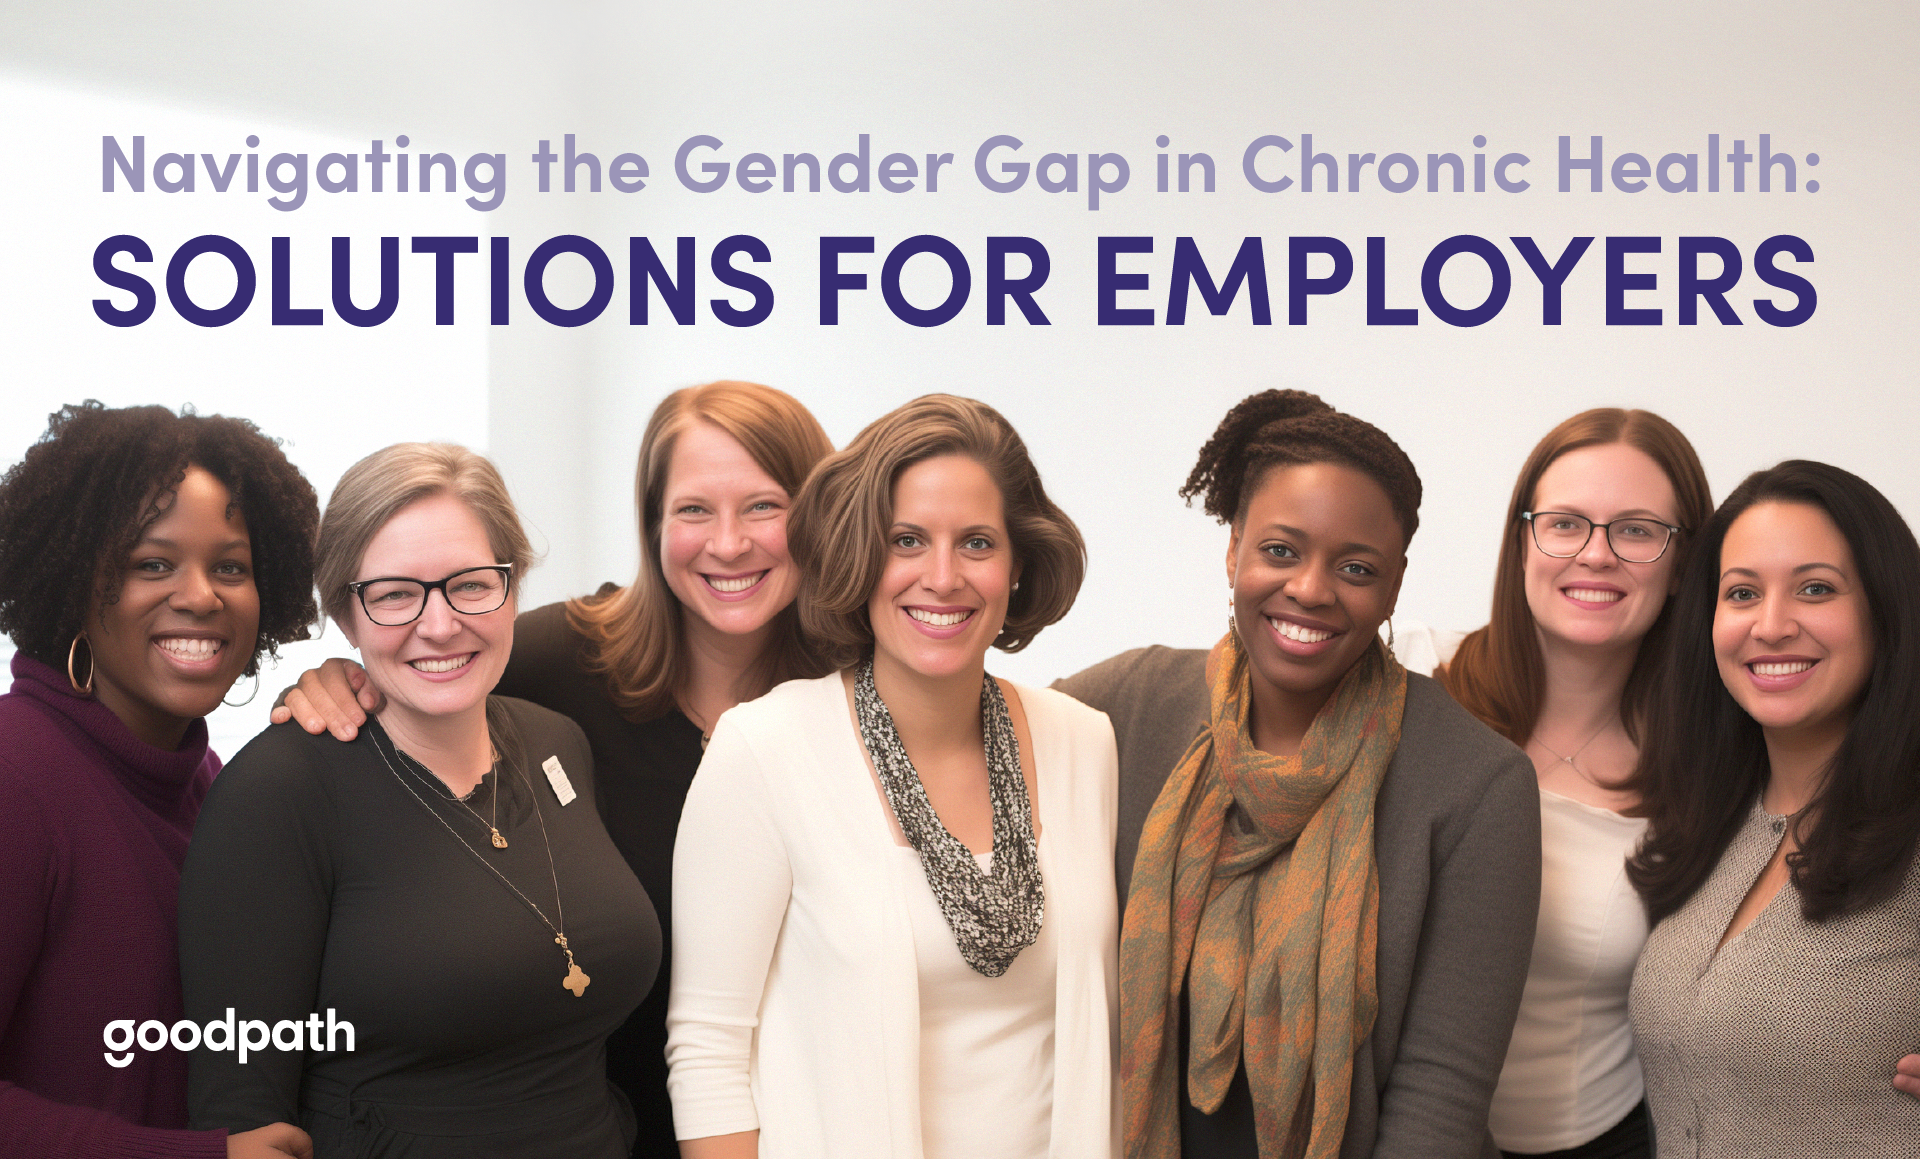 Navigating the Gender Gap in Chronic Health: Solutions for Employers